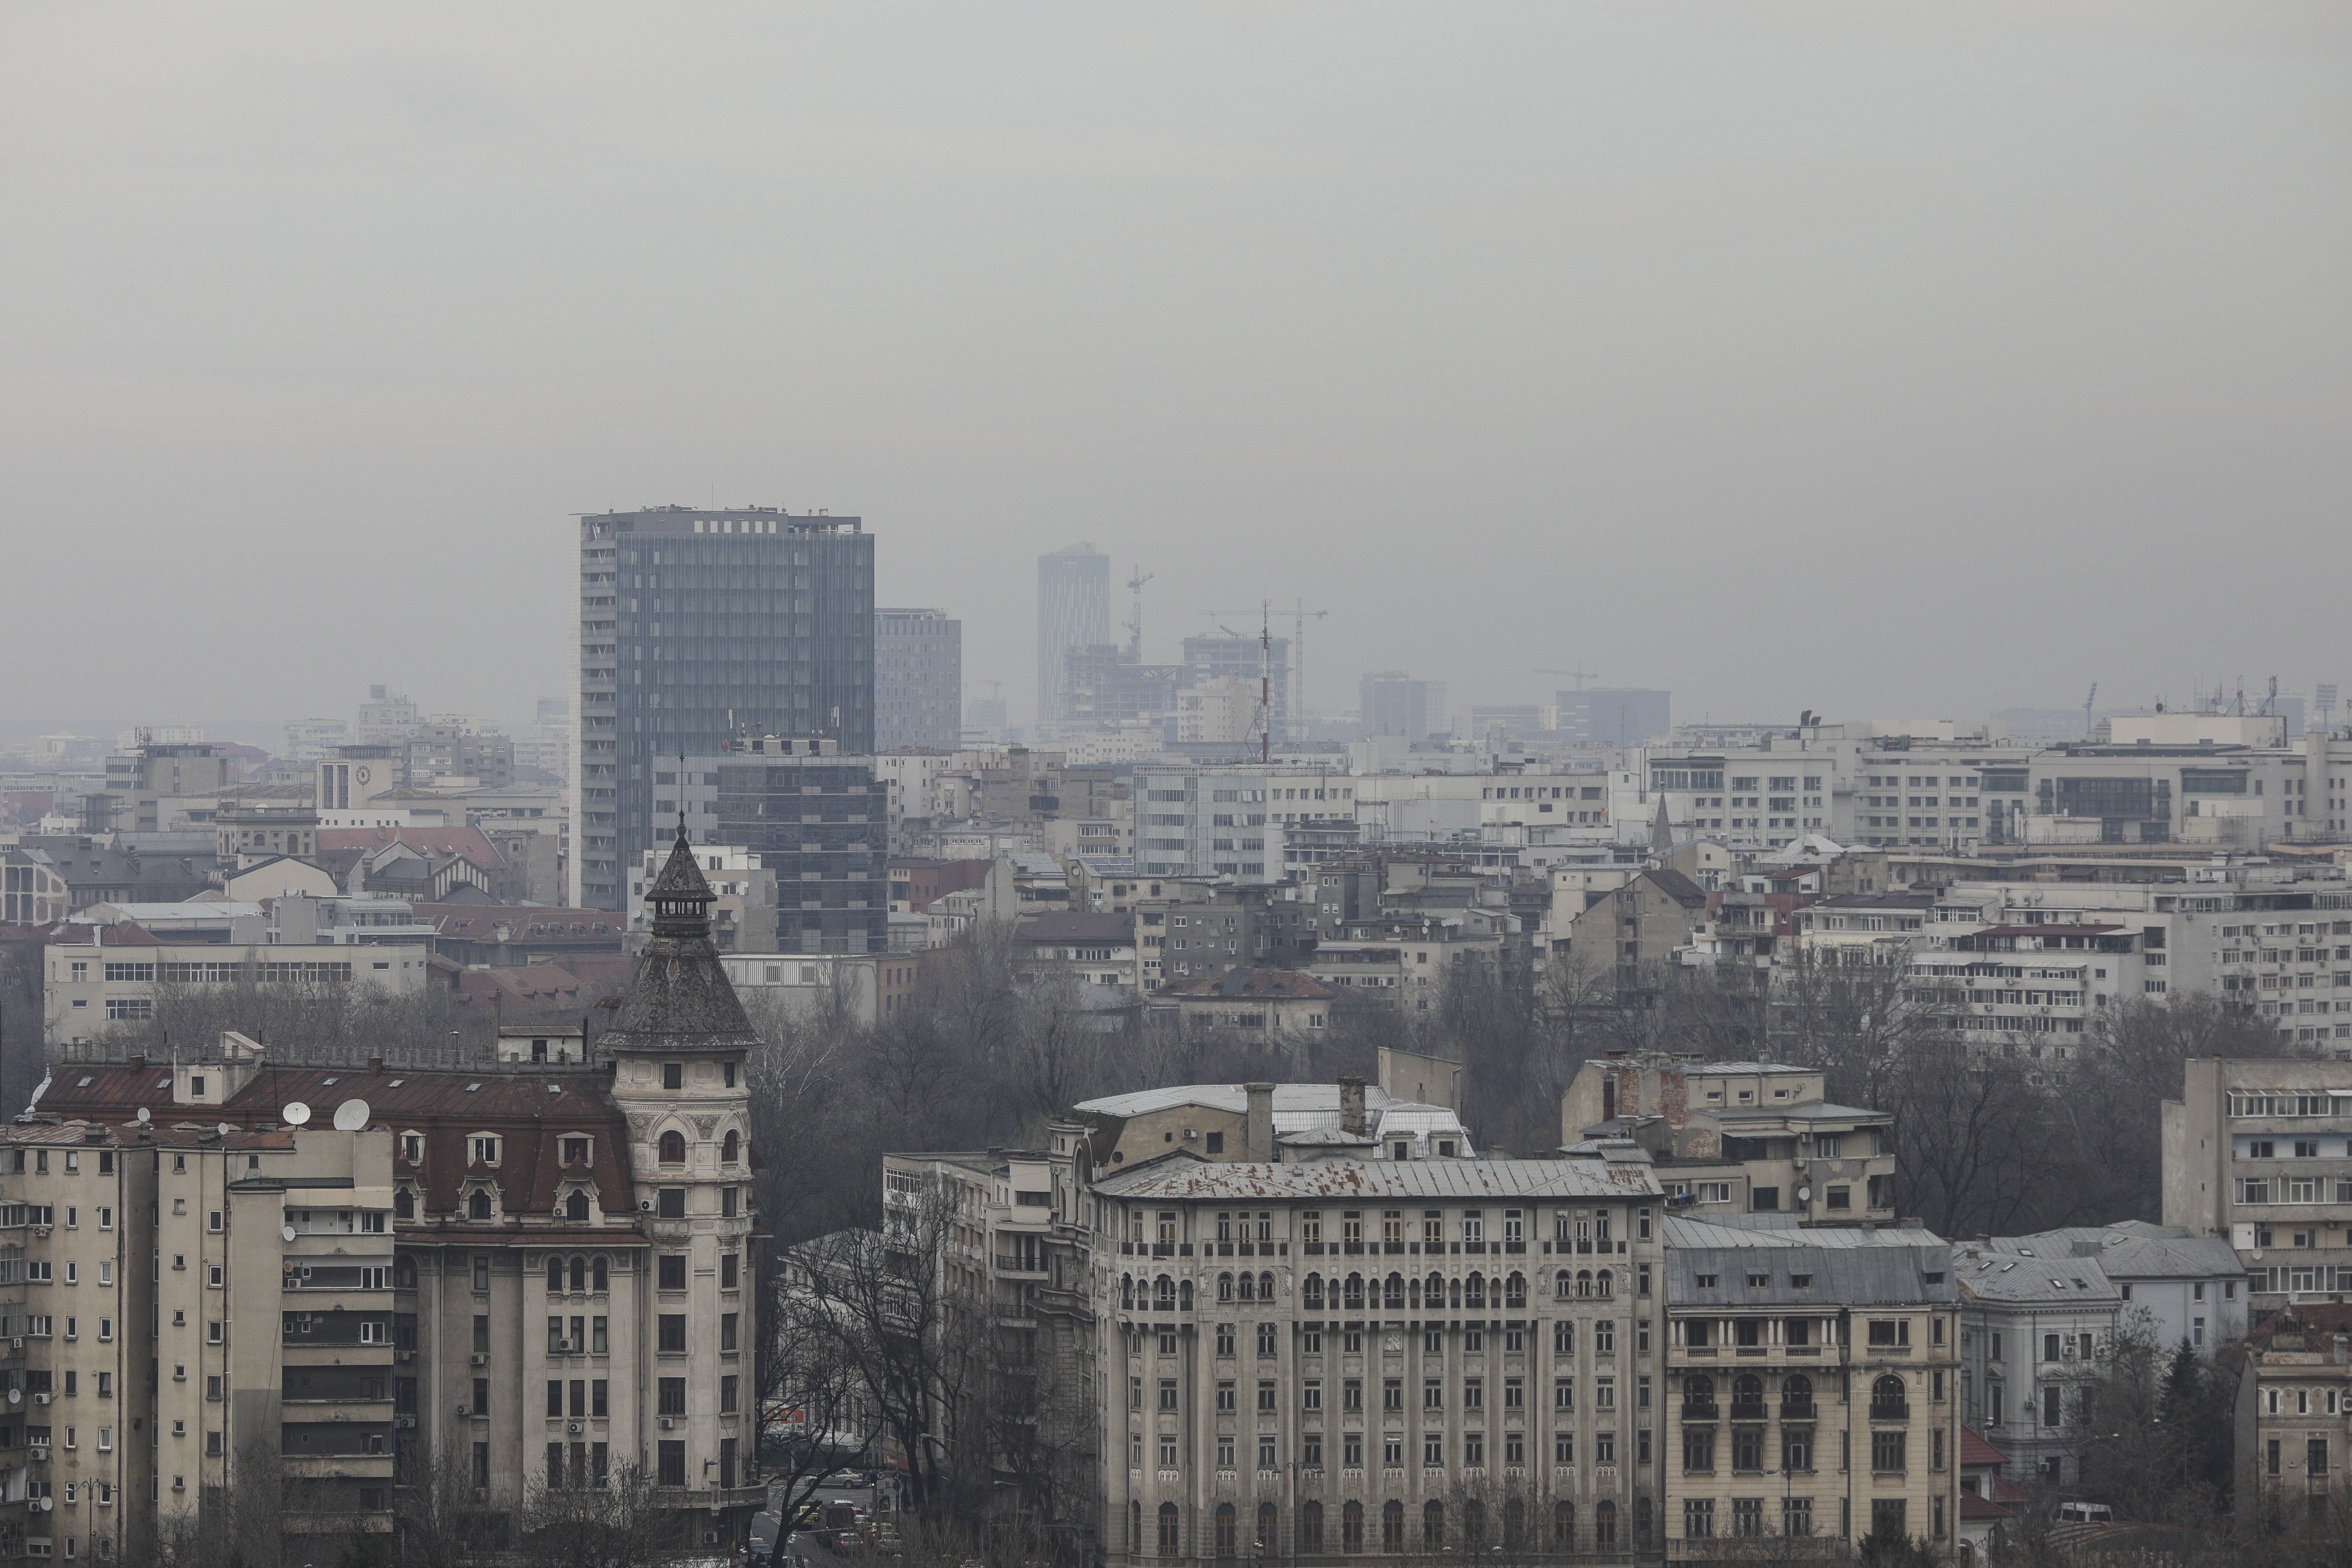 Air pollution measured by health costs per capita in Bucharest, highest in Europe